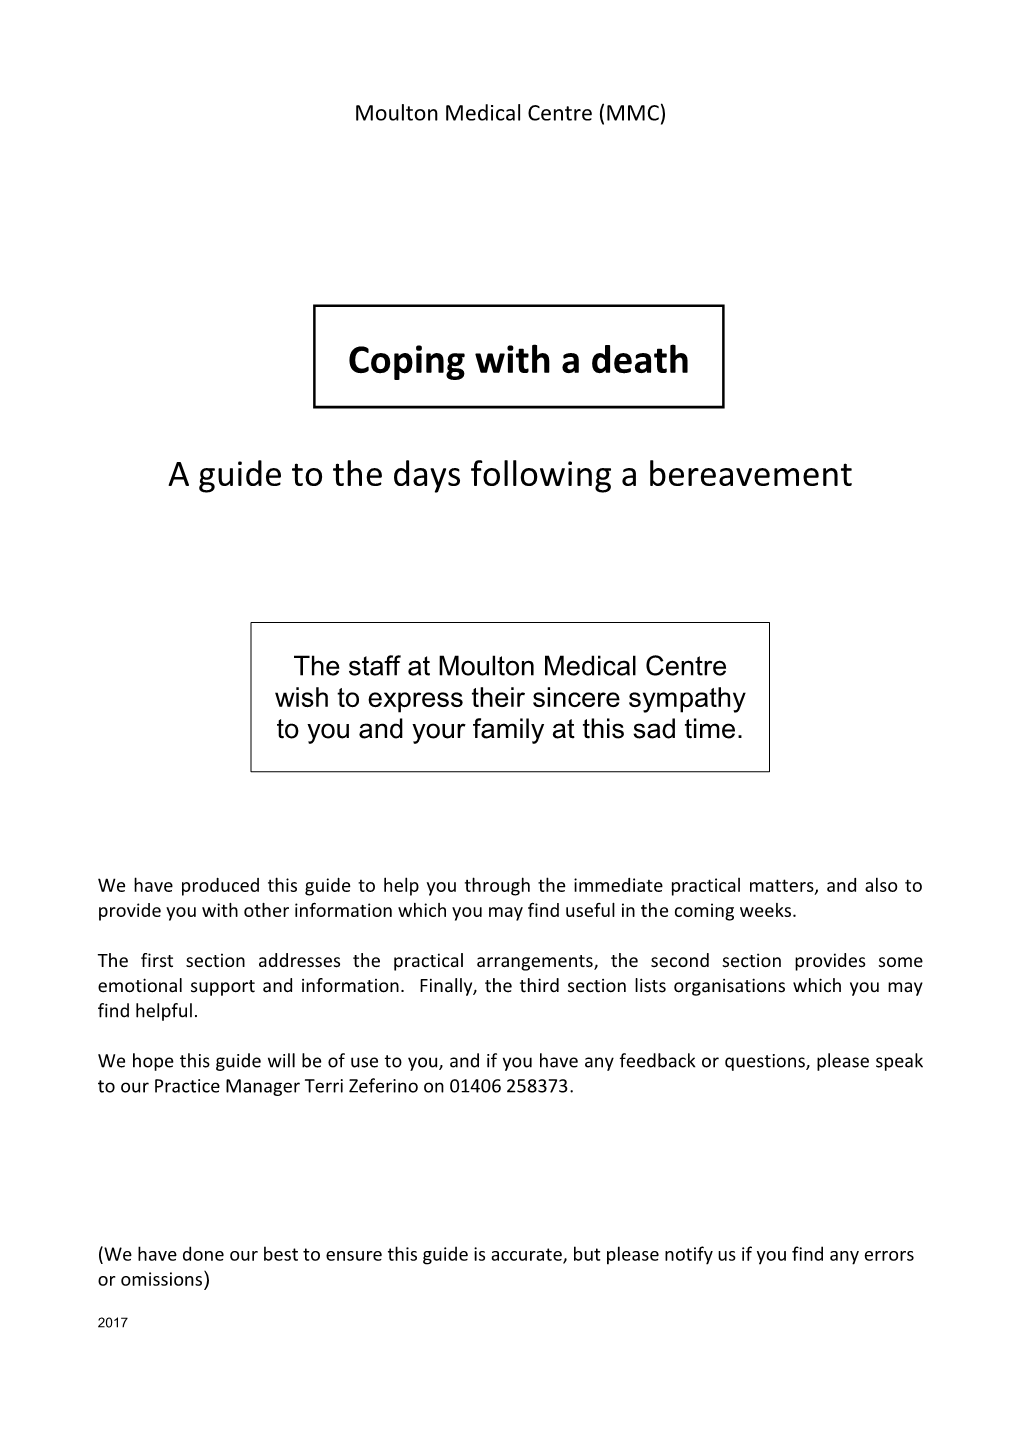 Coping with a Death Guide